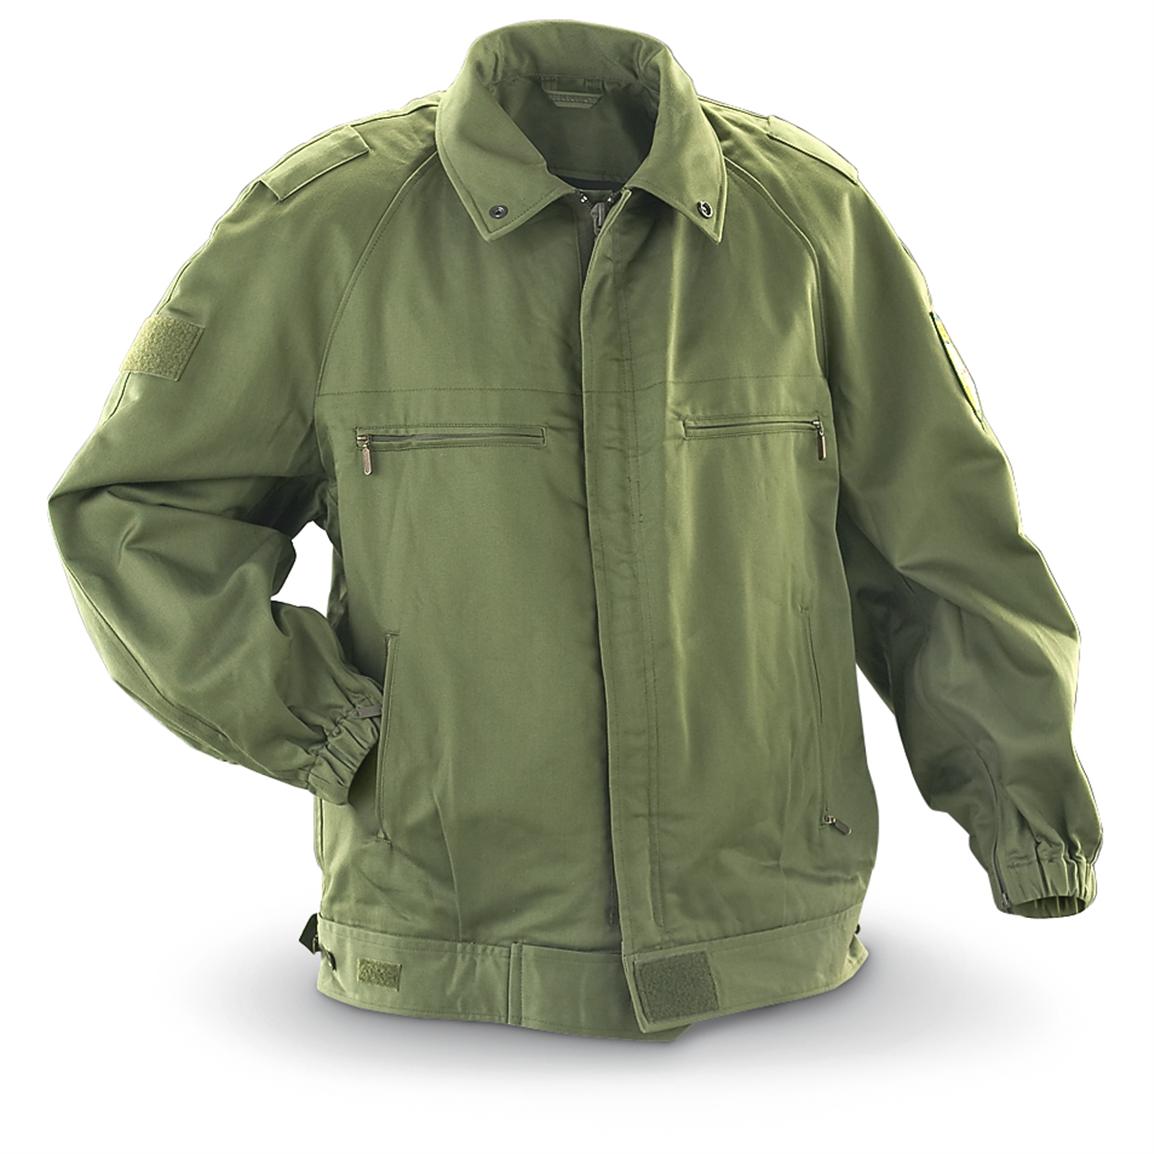 New German Military Police Riot Jacket, Olive Drab - 173079 ...